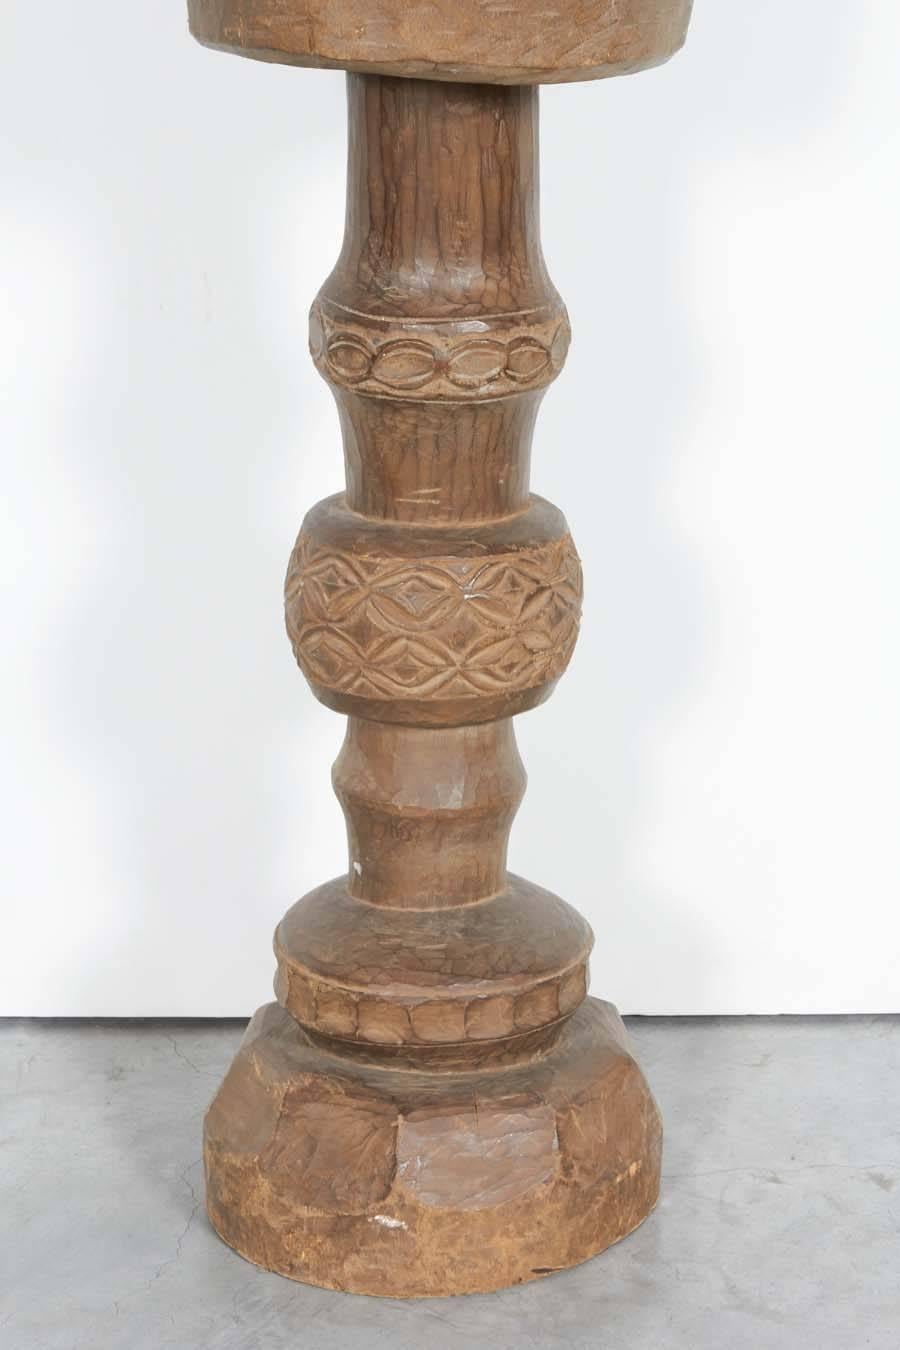 Leather Sumba Ceremonial Drums For Sale